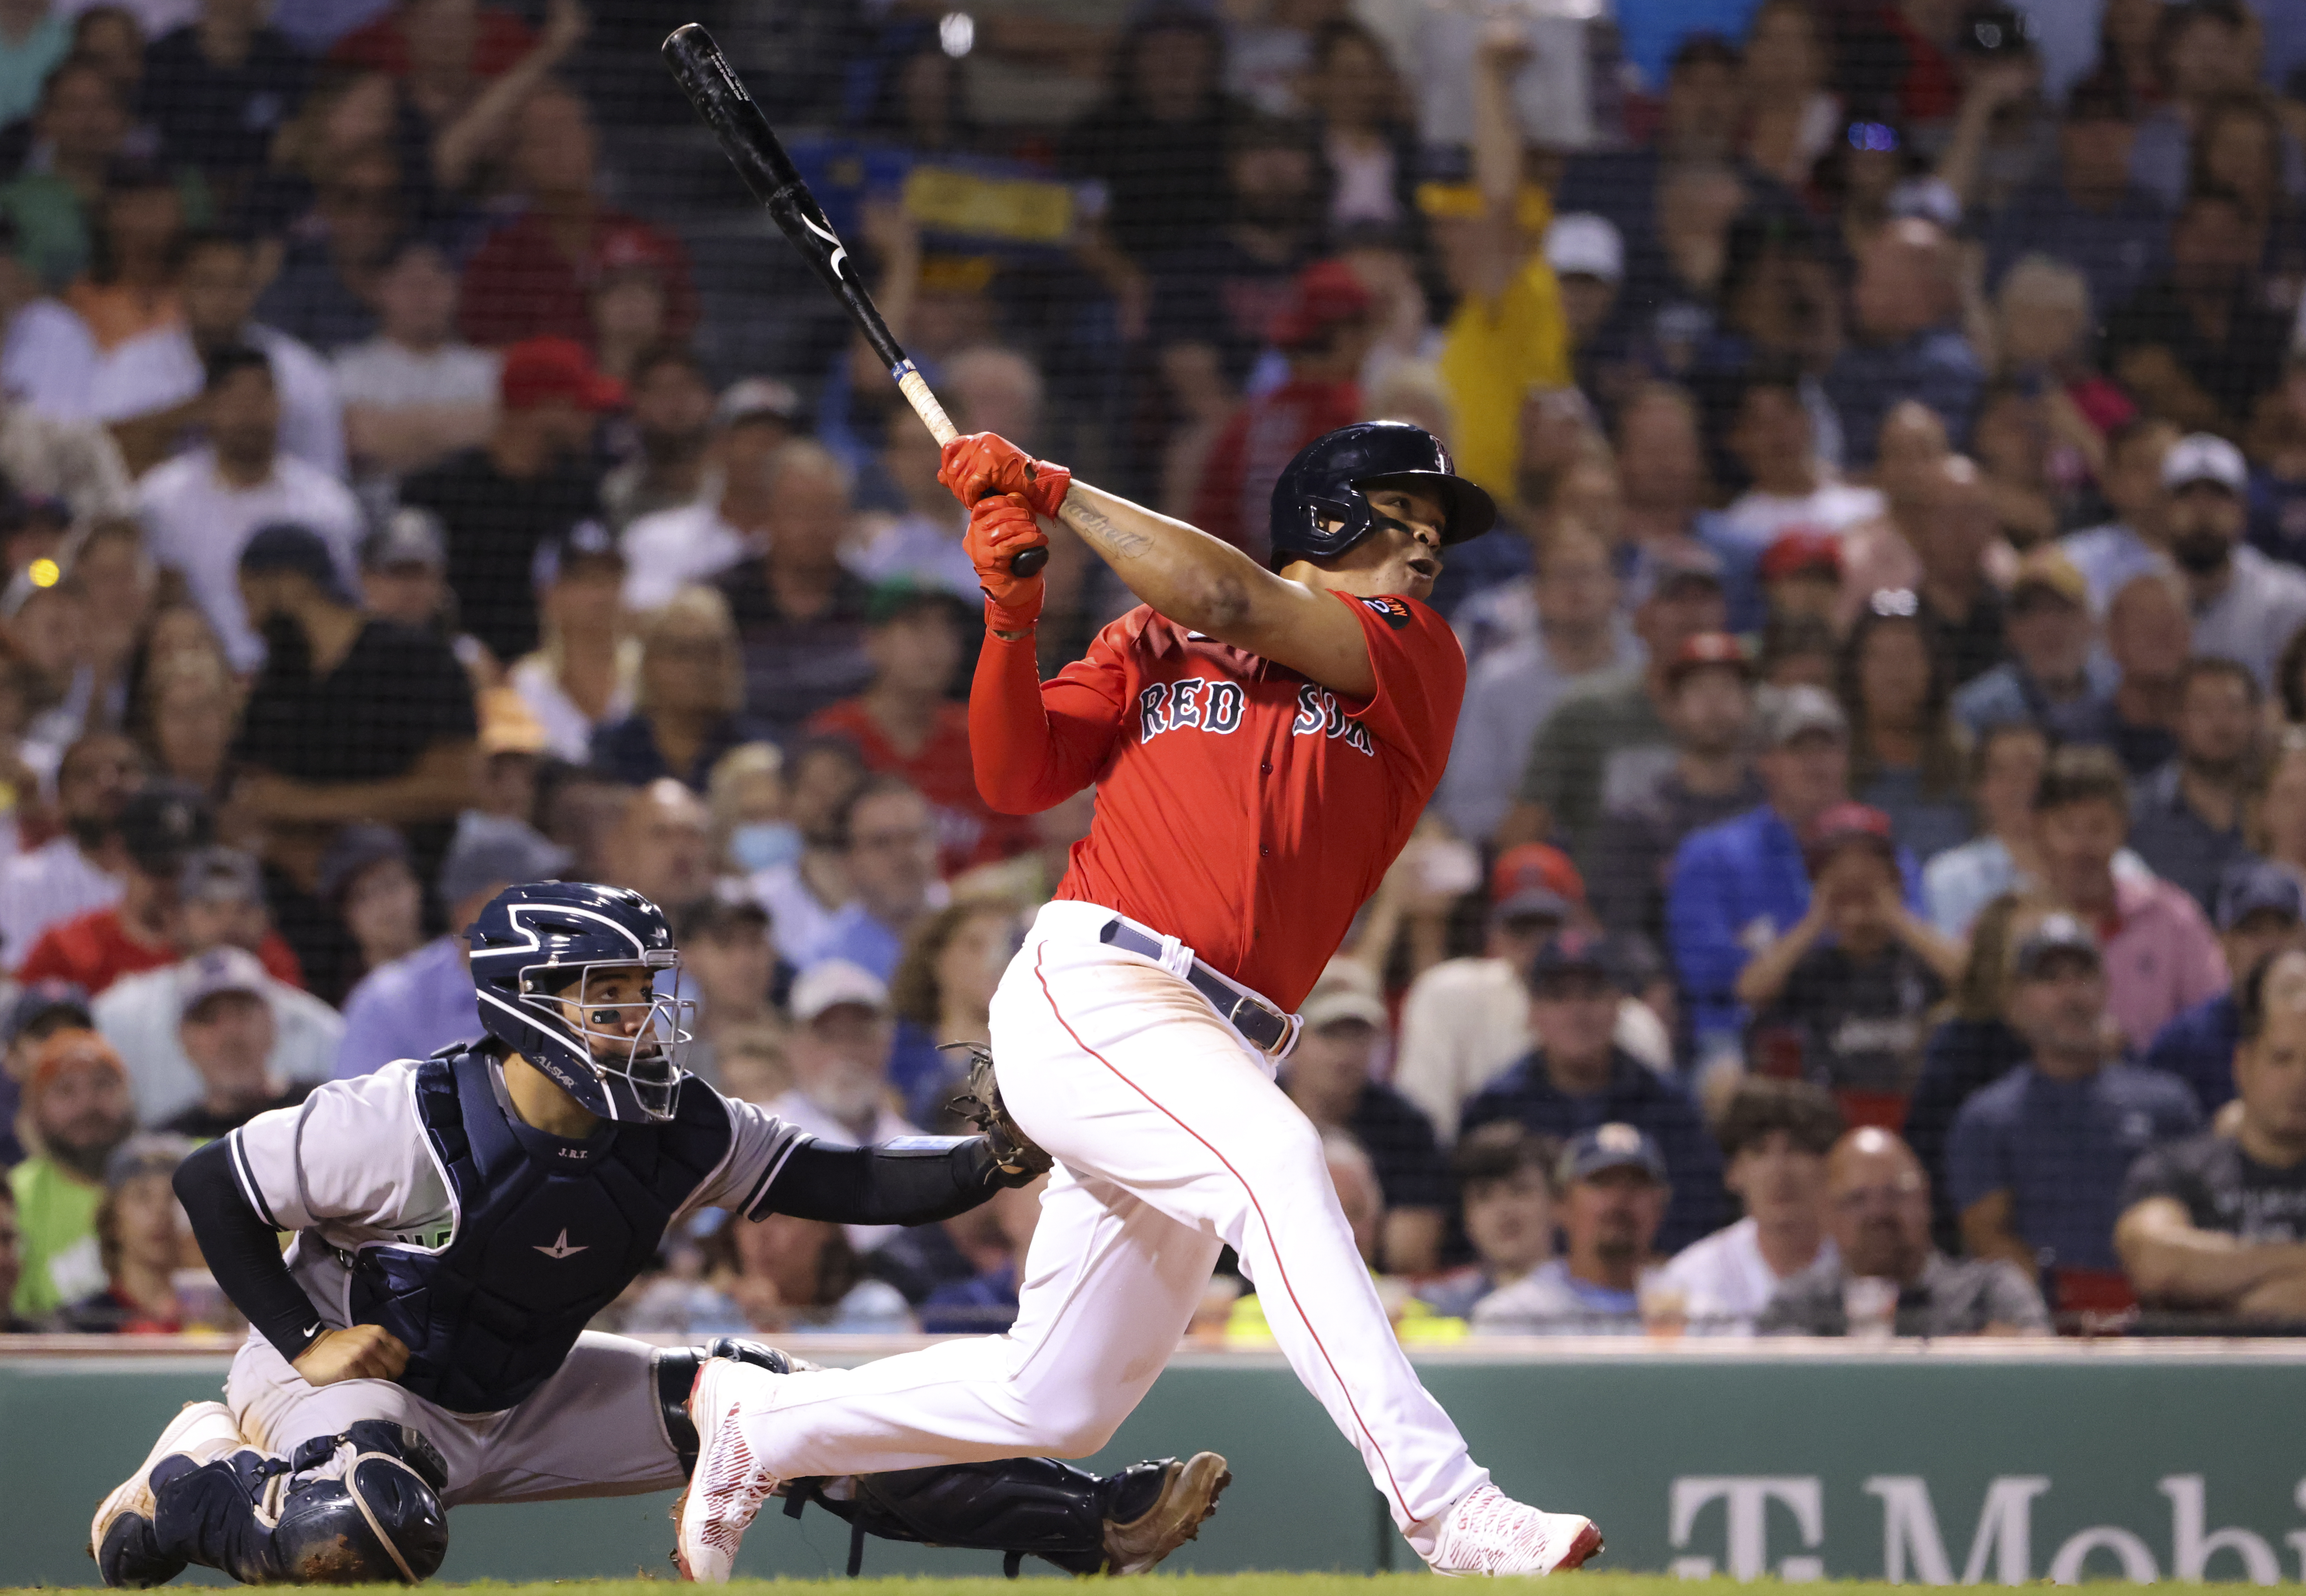 Red Sox Thrash Yankees in a Humiliating Home Defeat - The New York